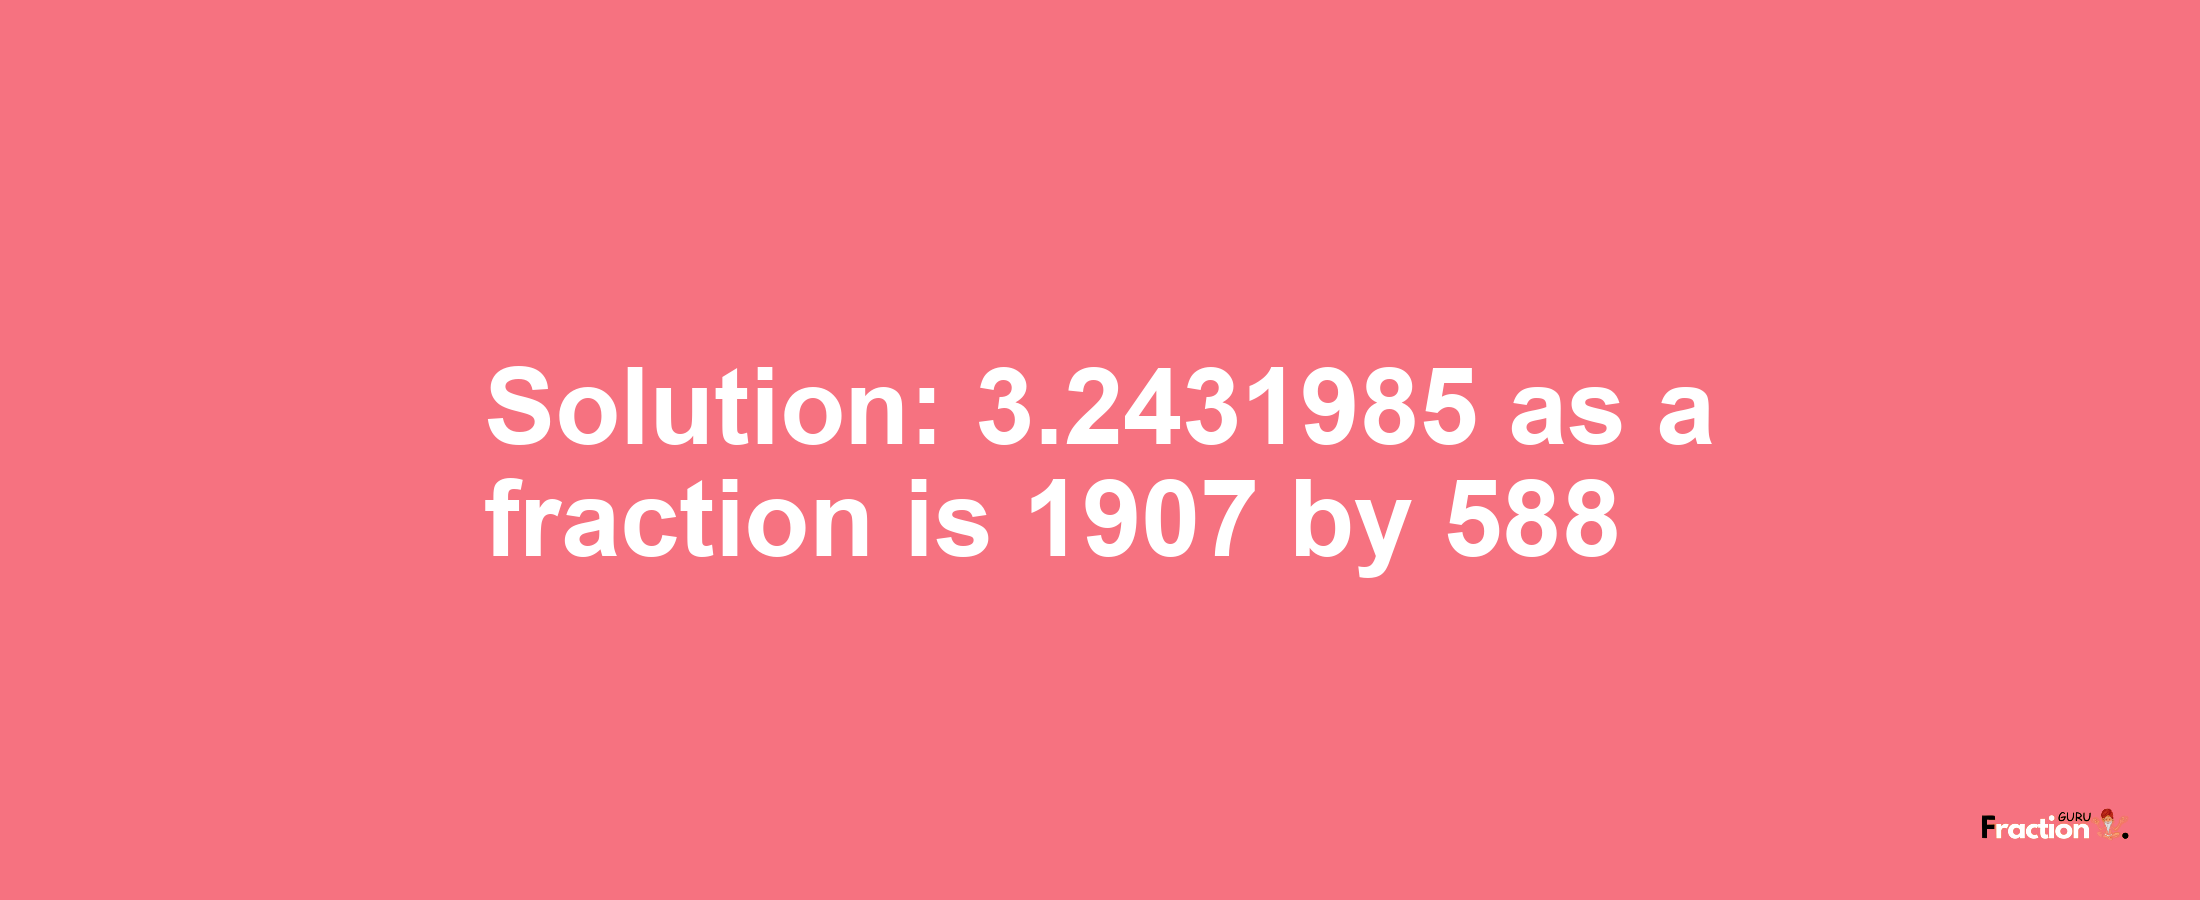 Solution:3.2431985 as a fraction is 1907/588